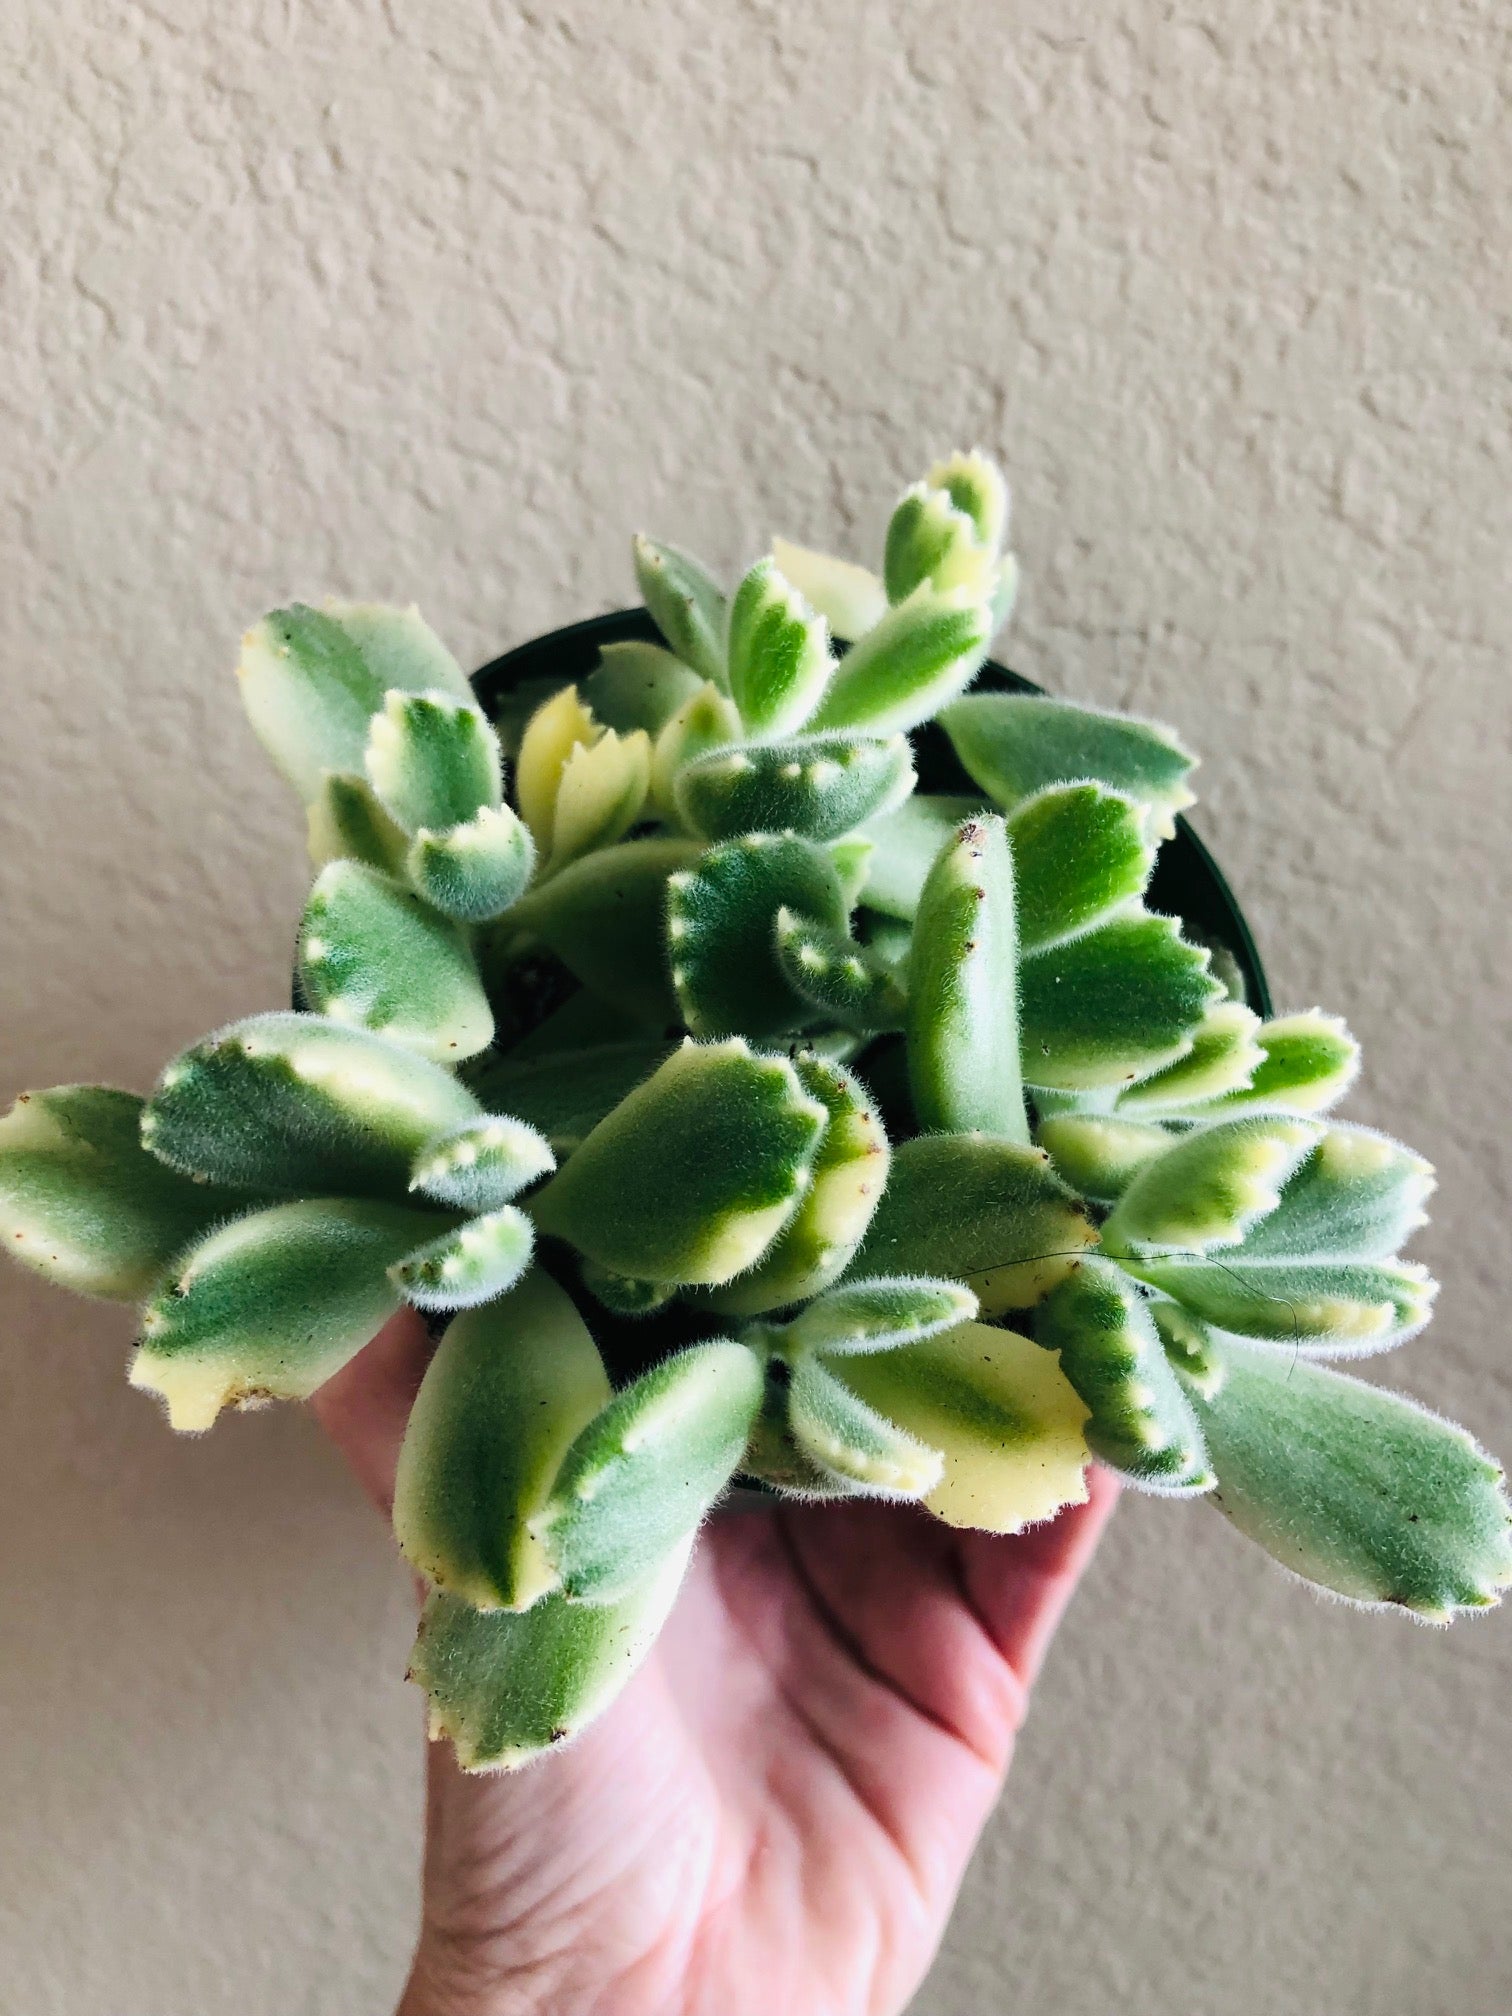 Variegated Bear Paw Succulent